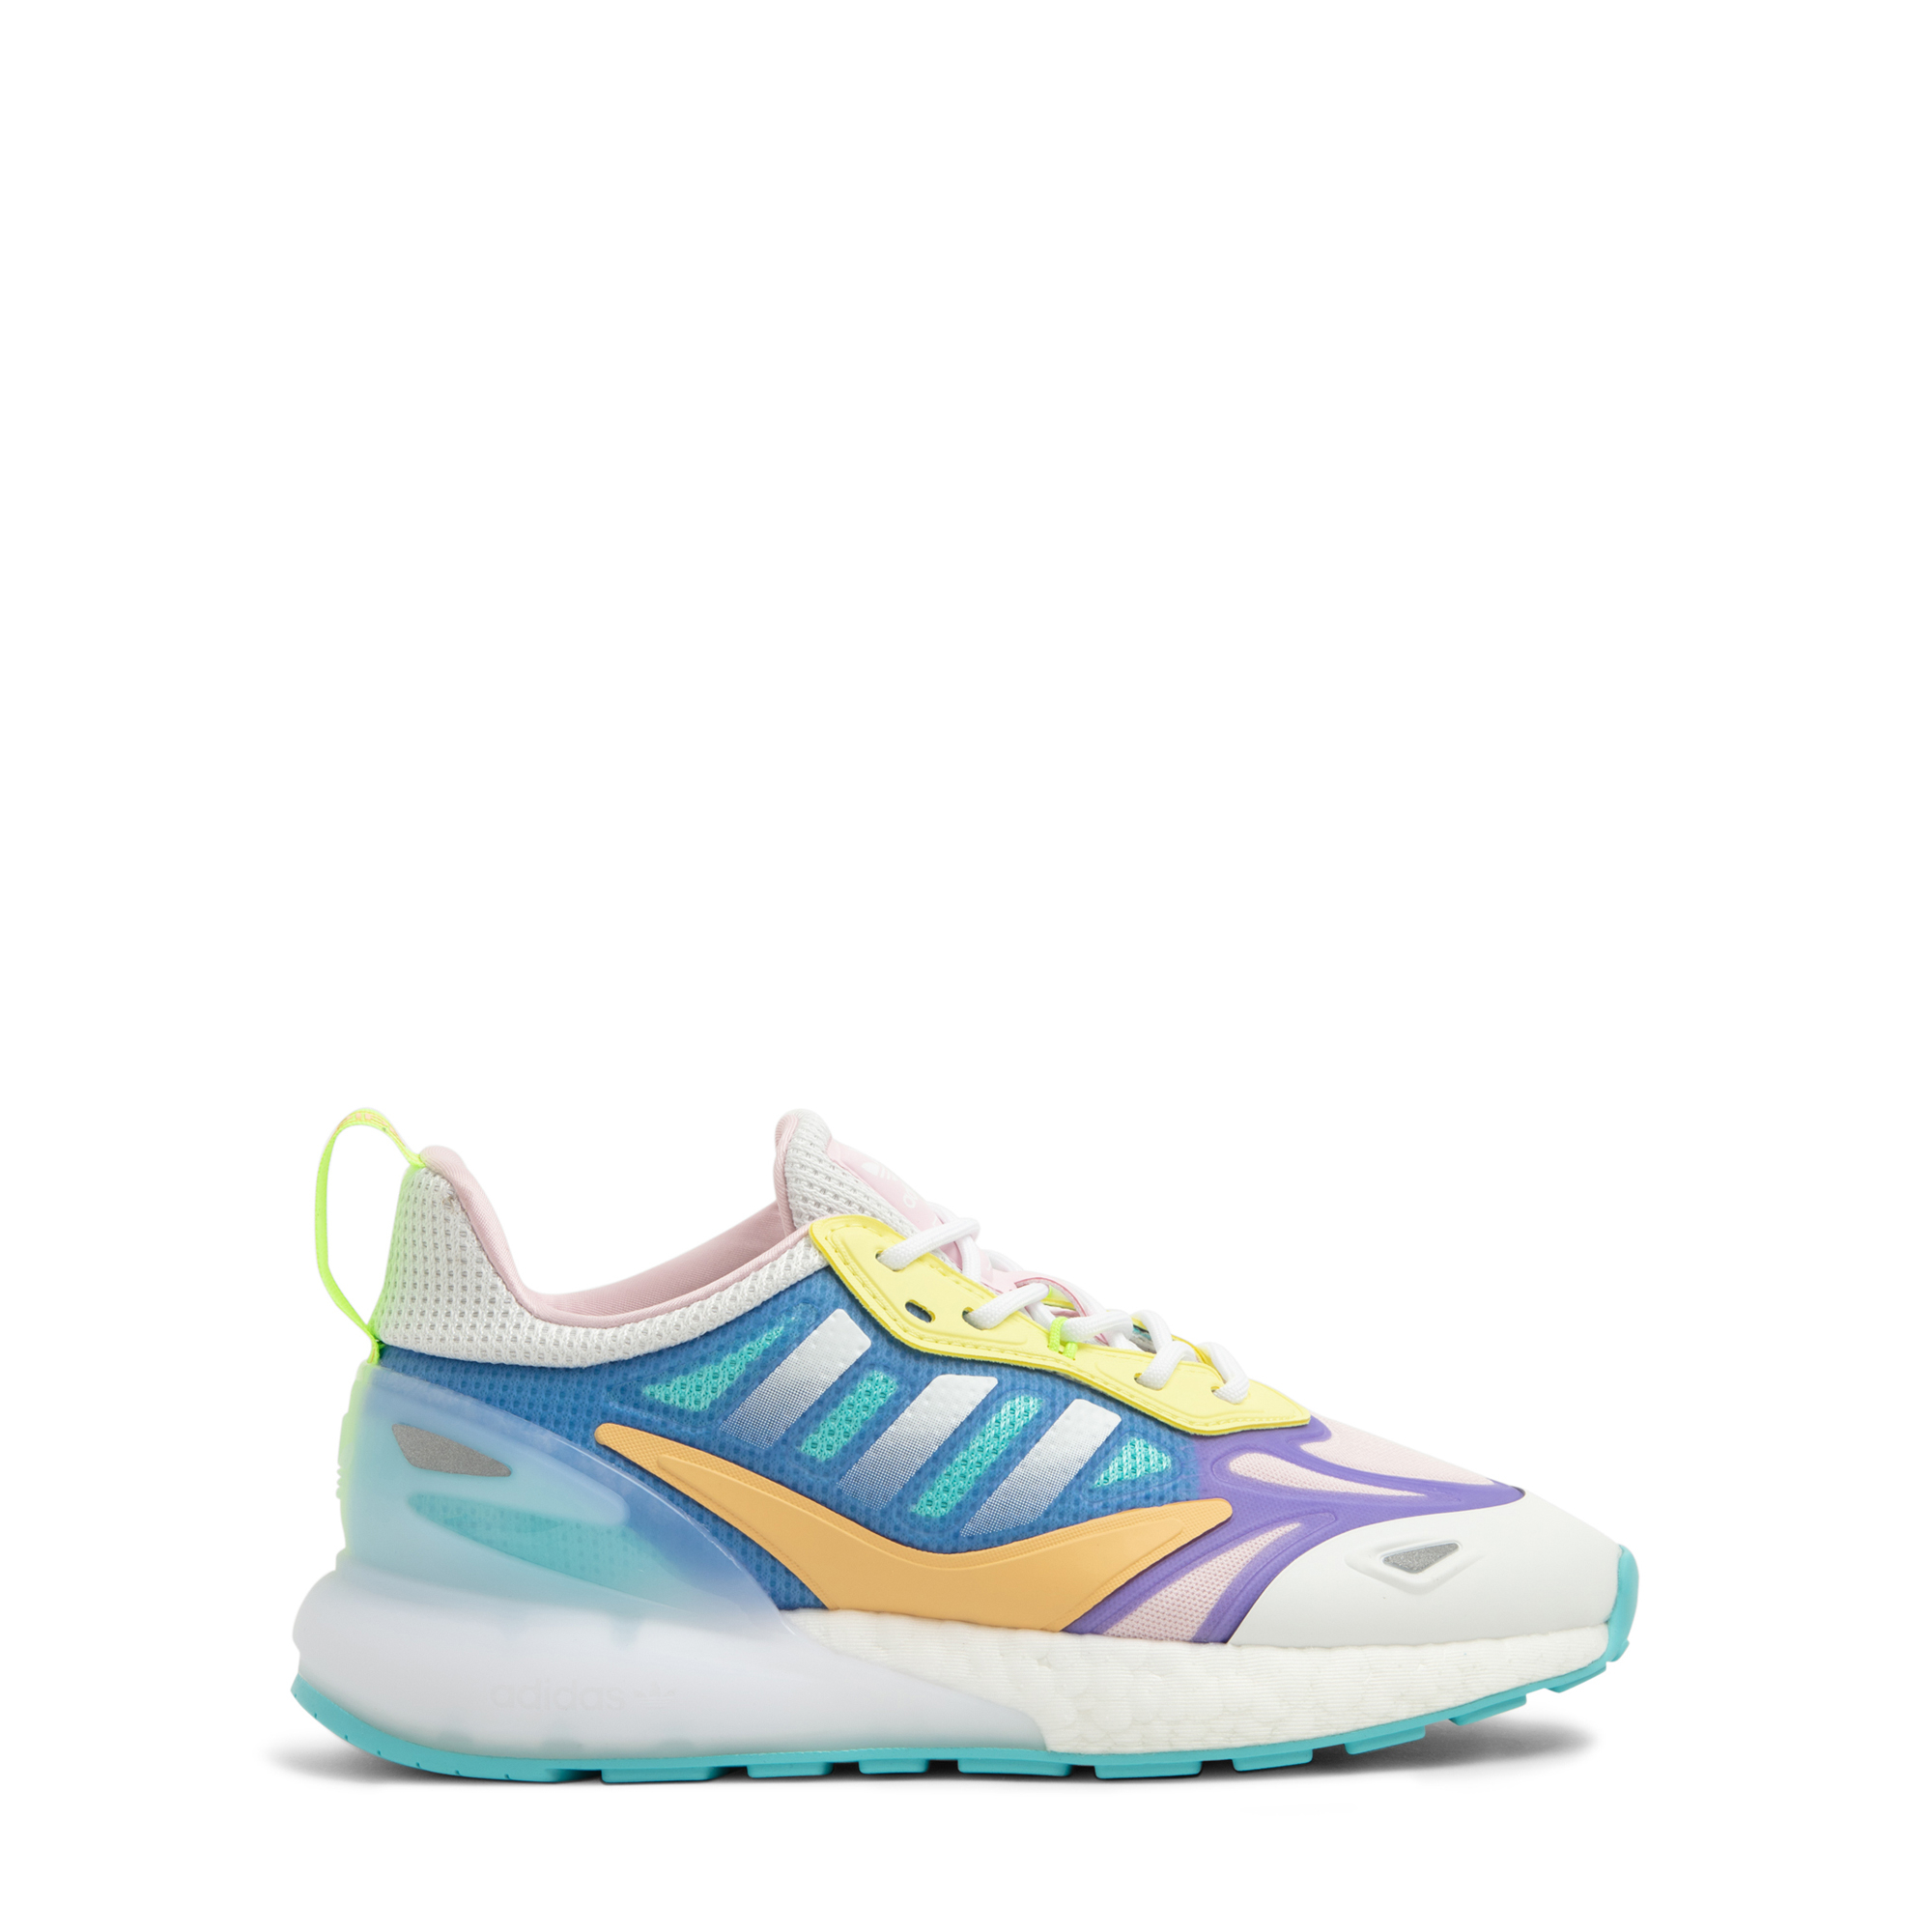 Adidas ZX 2K Boost 2.0 sneakers for Girl - Multicolored in KSA 